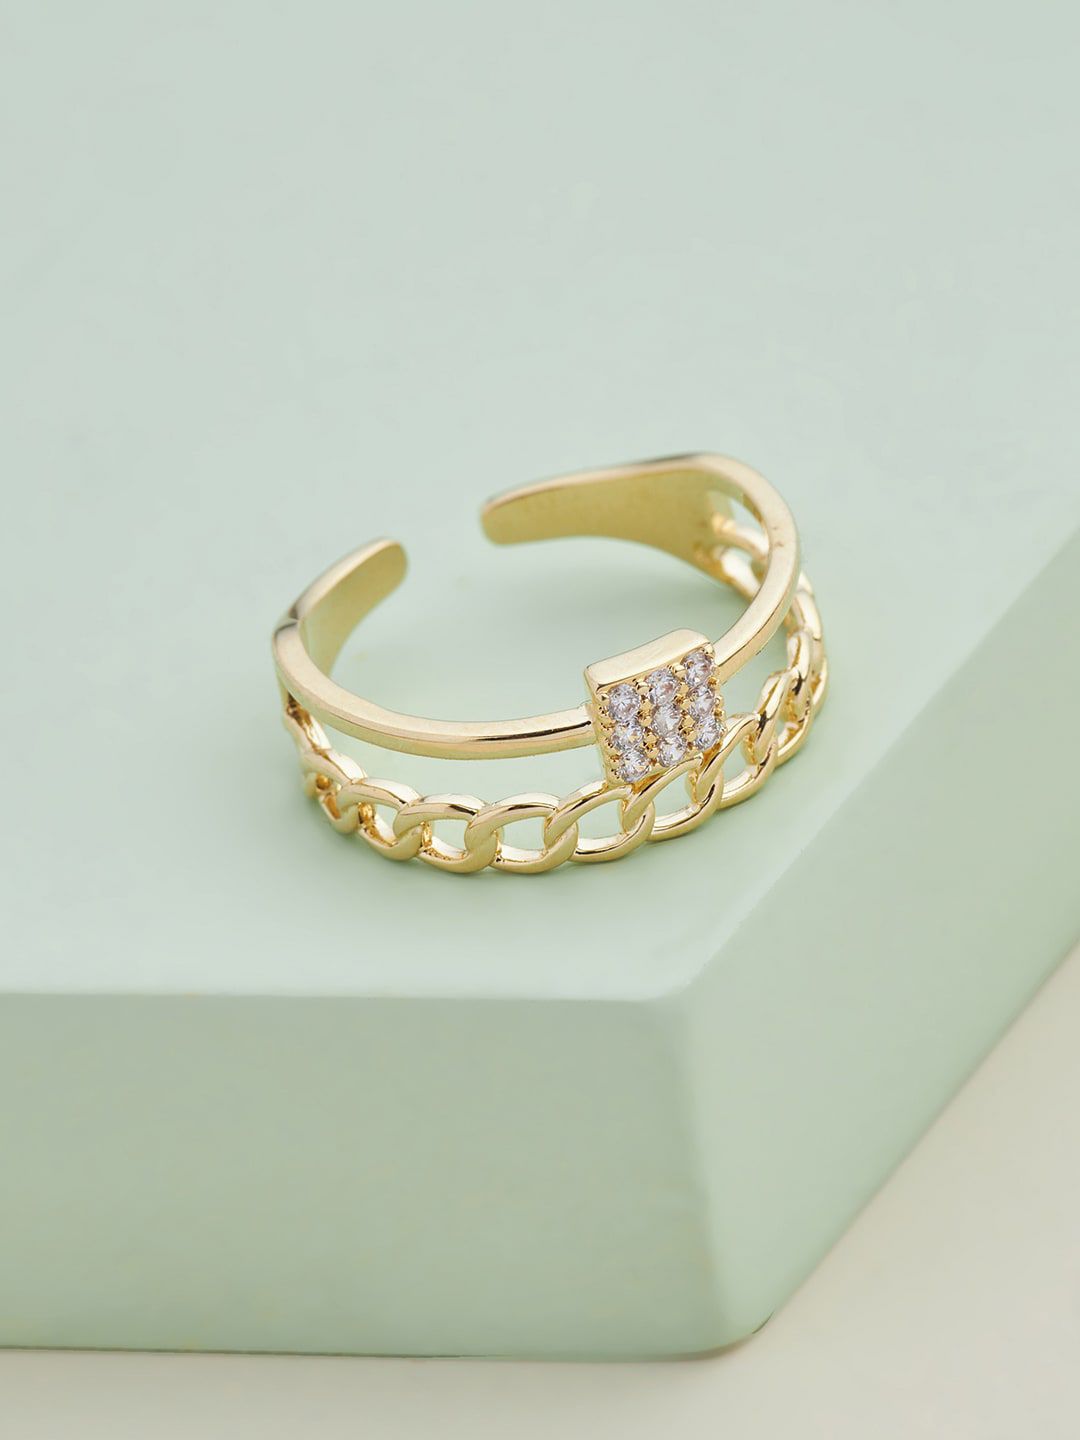 Kushal's Fashion Jewellery Gold-Plated White Stone-Studded Adjustable Finger Ring Price in India